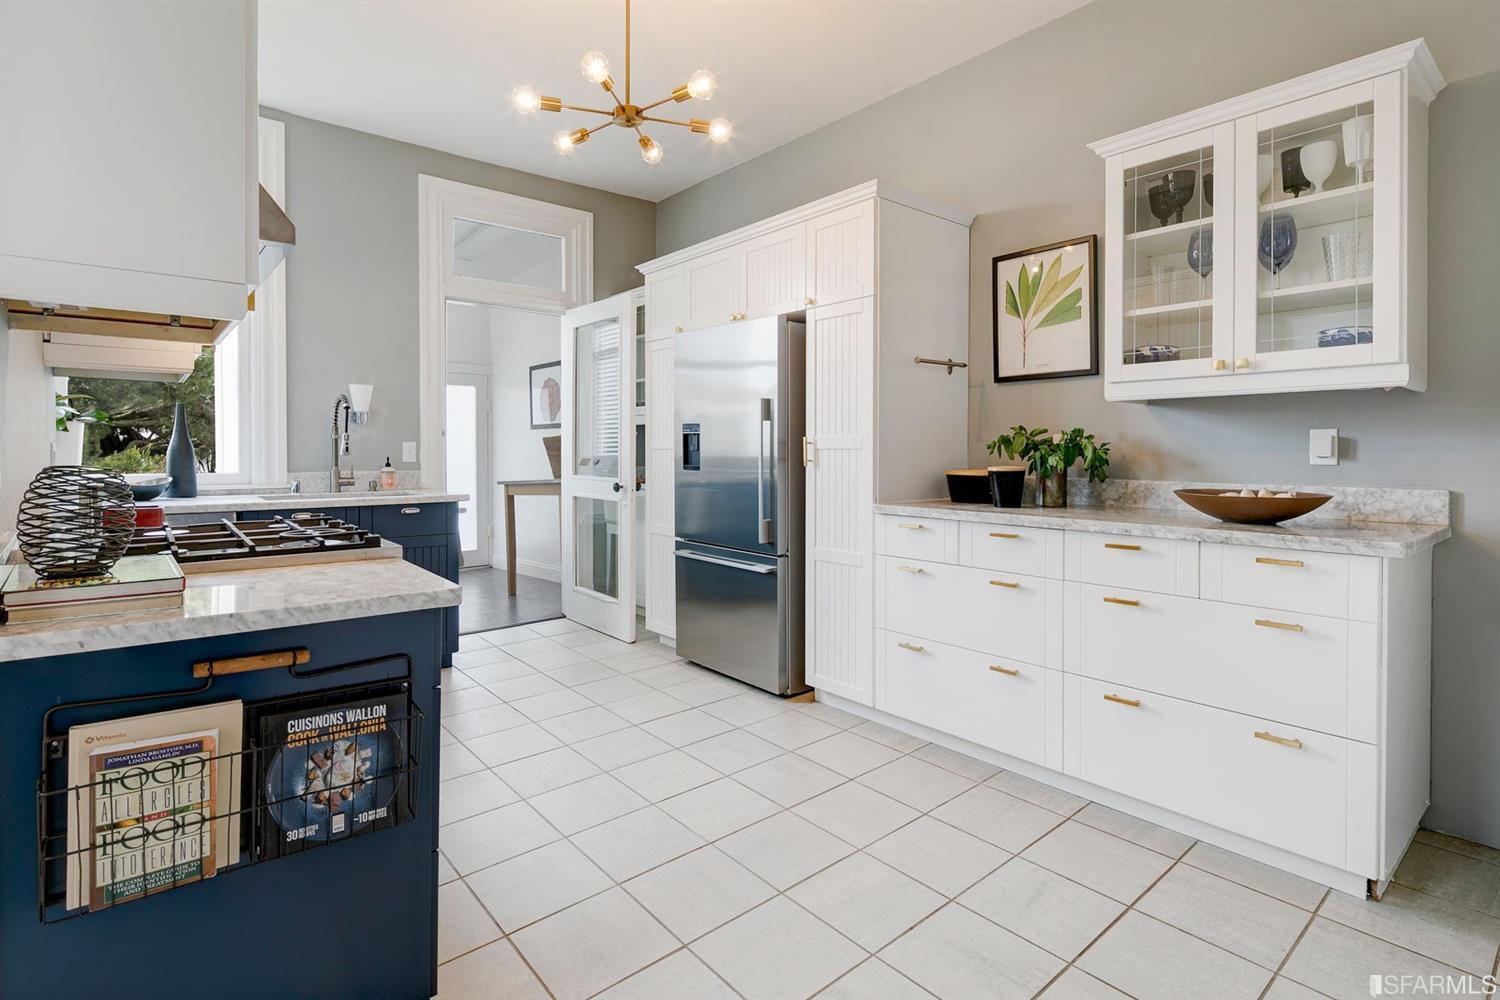 Property Photo: Kitchen, featuring white cabinets and tile floor